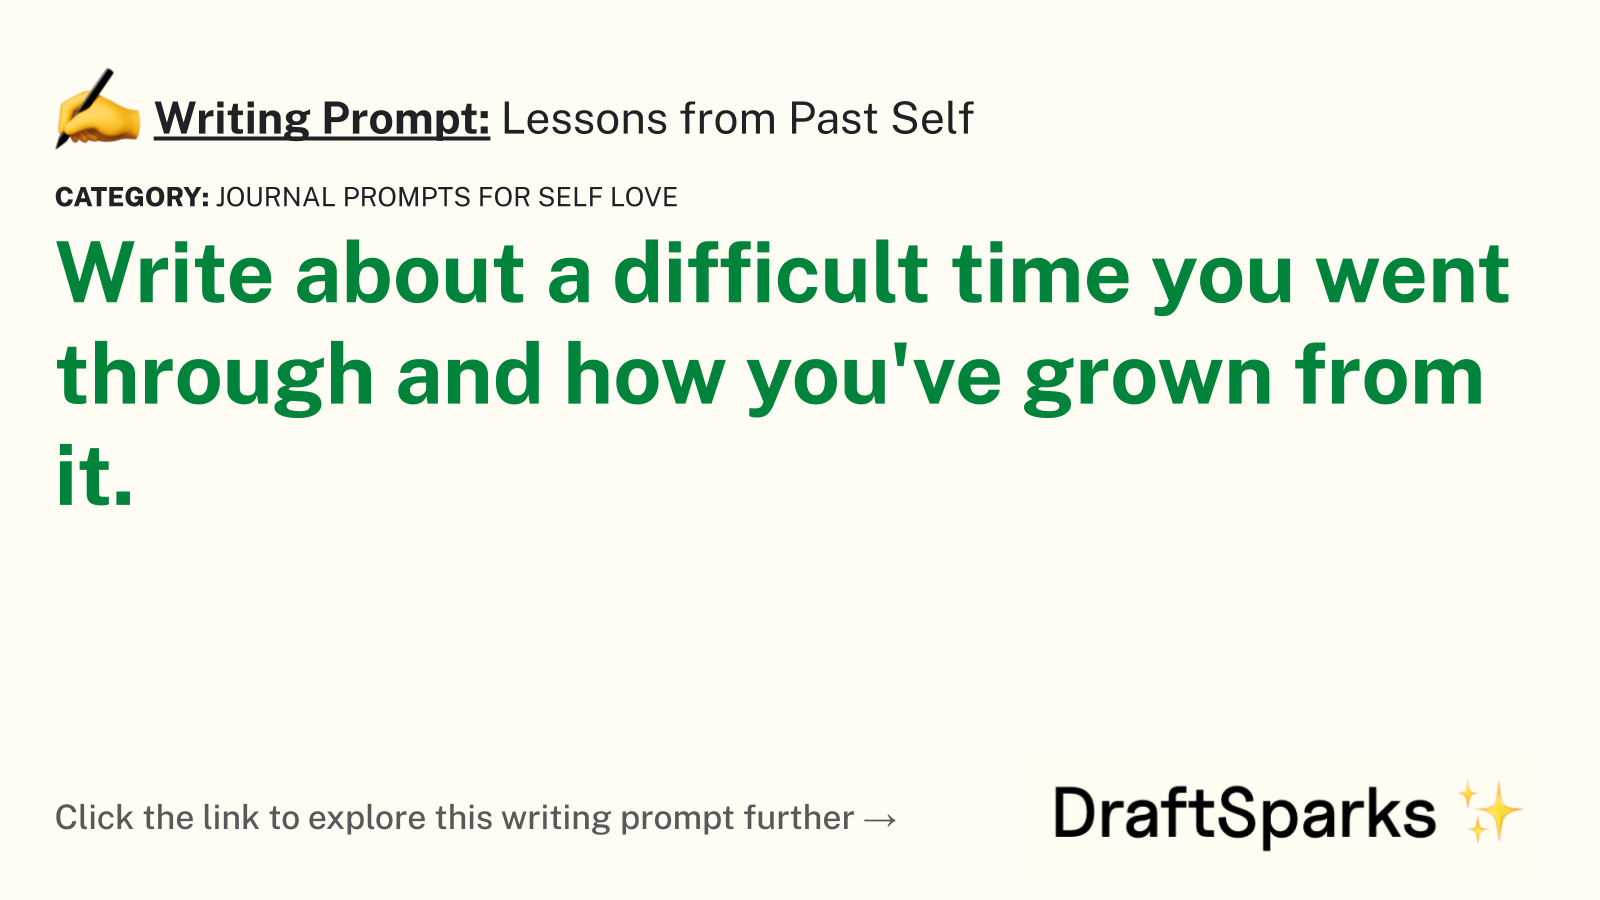 Lessons from Past Self